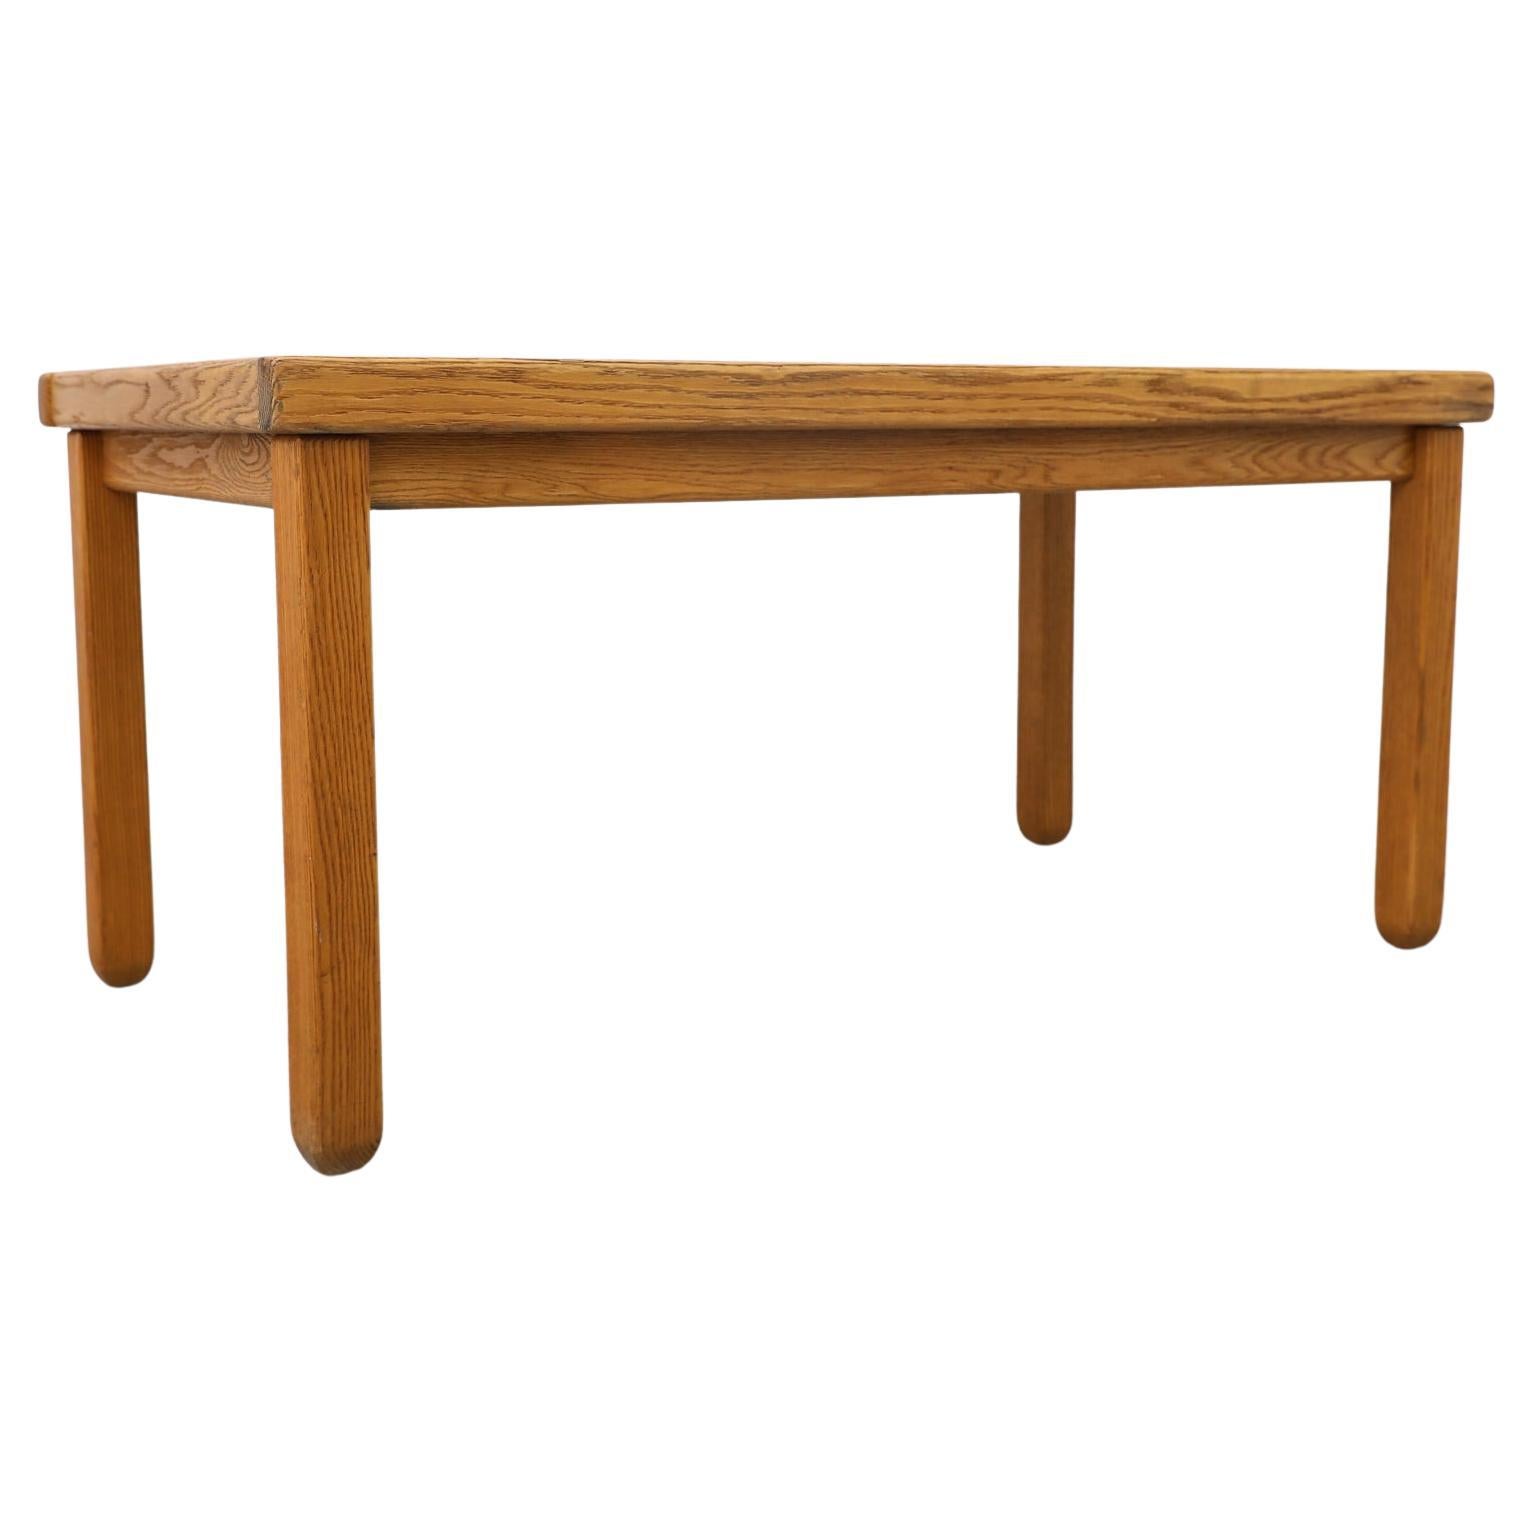 Brutalist Belgian Slatted Oak Dining Table w/ Rounded Legs Attributed to DePuydt For Sale